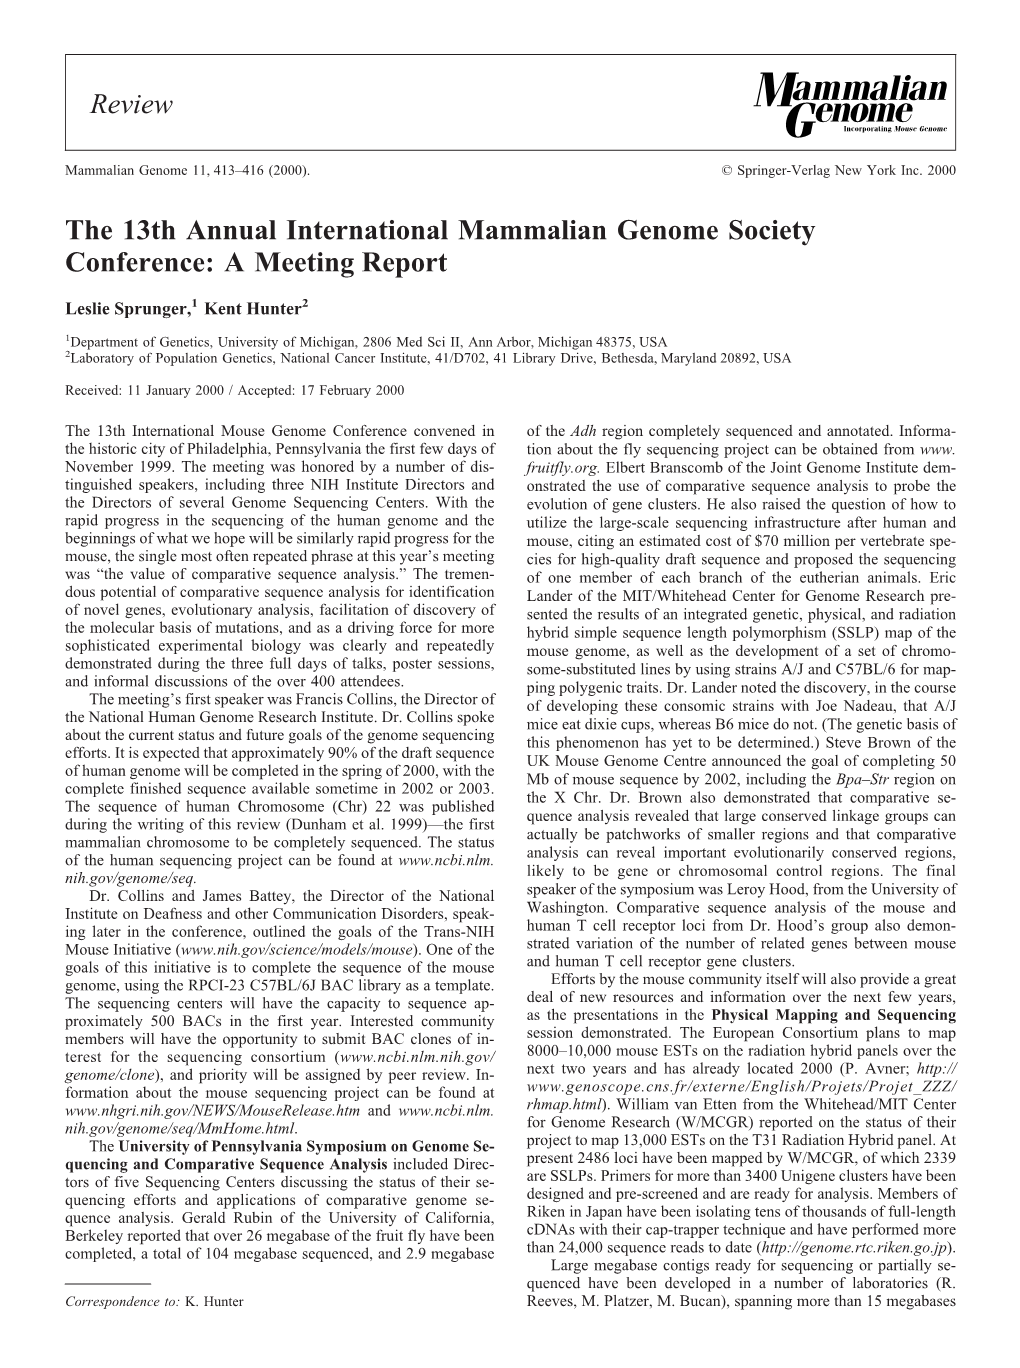 The 13Th Annual International Mammalian Genome Society Conference: a Meeting Report